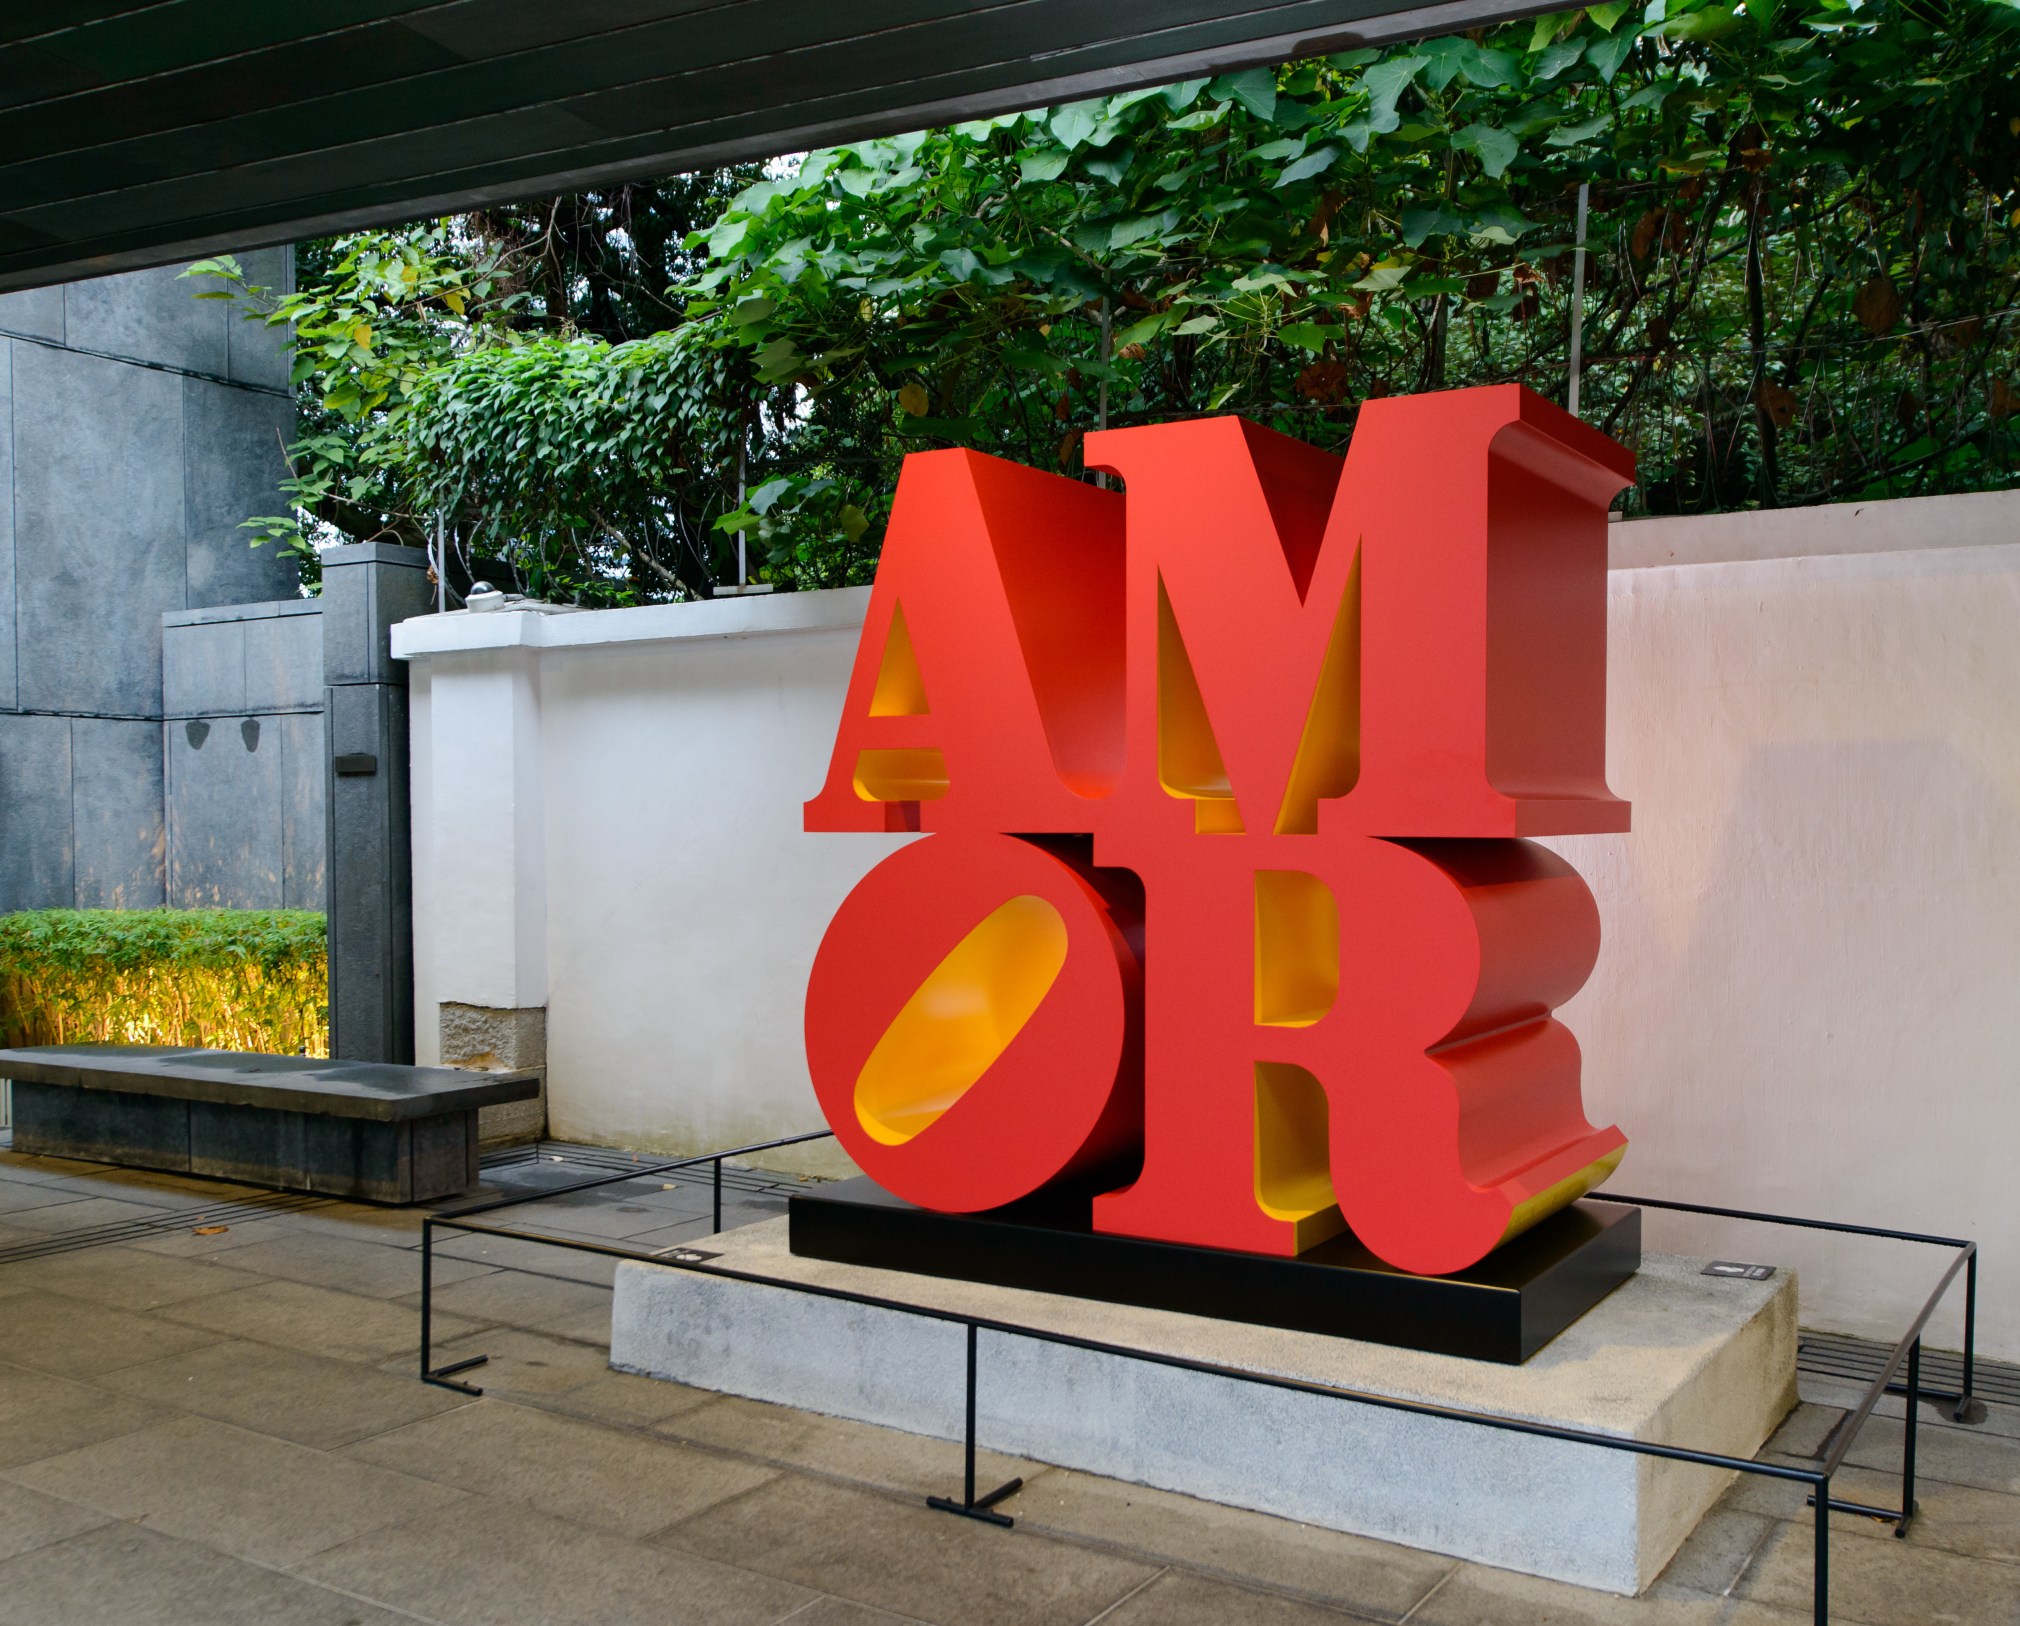 AMOR, a 72 by 72 by 36 inch polychrome aluminum sculpture consisting of the letters A and M atop a tilted O and R. The front, back and sides of the letters are red, and the insides are yellow.